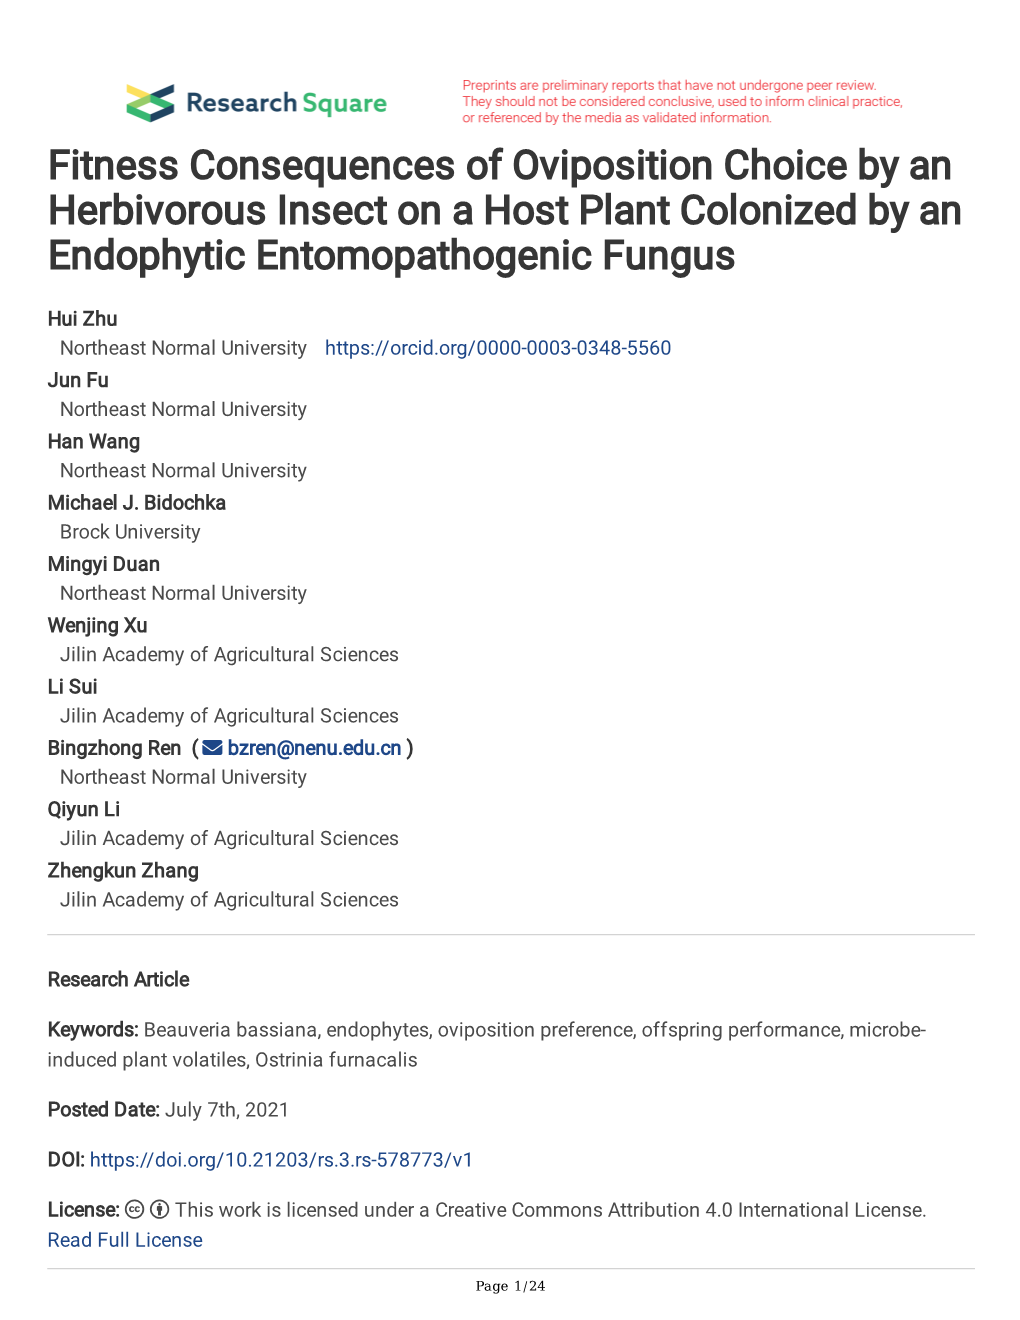 Fitness Consequences of Oviposition Choice by an Herbivorous Insect on a Host Plant Colonized by an Endophytic Entomopathogenic Fungus